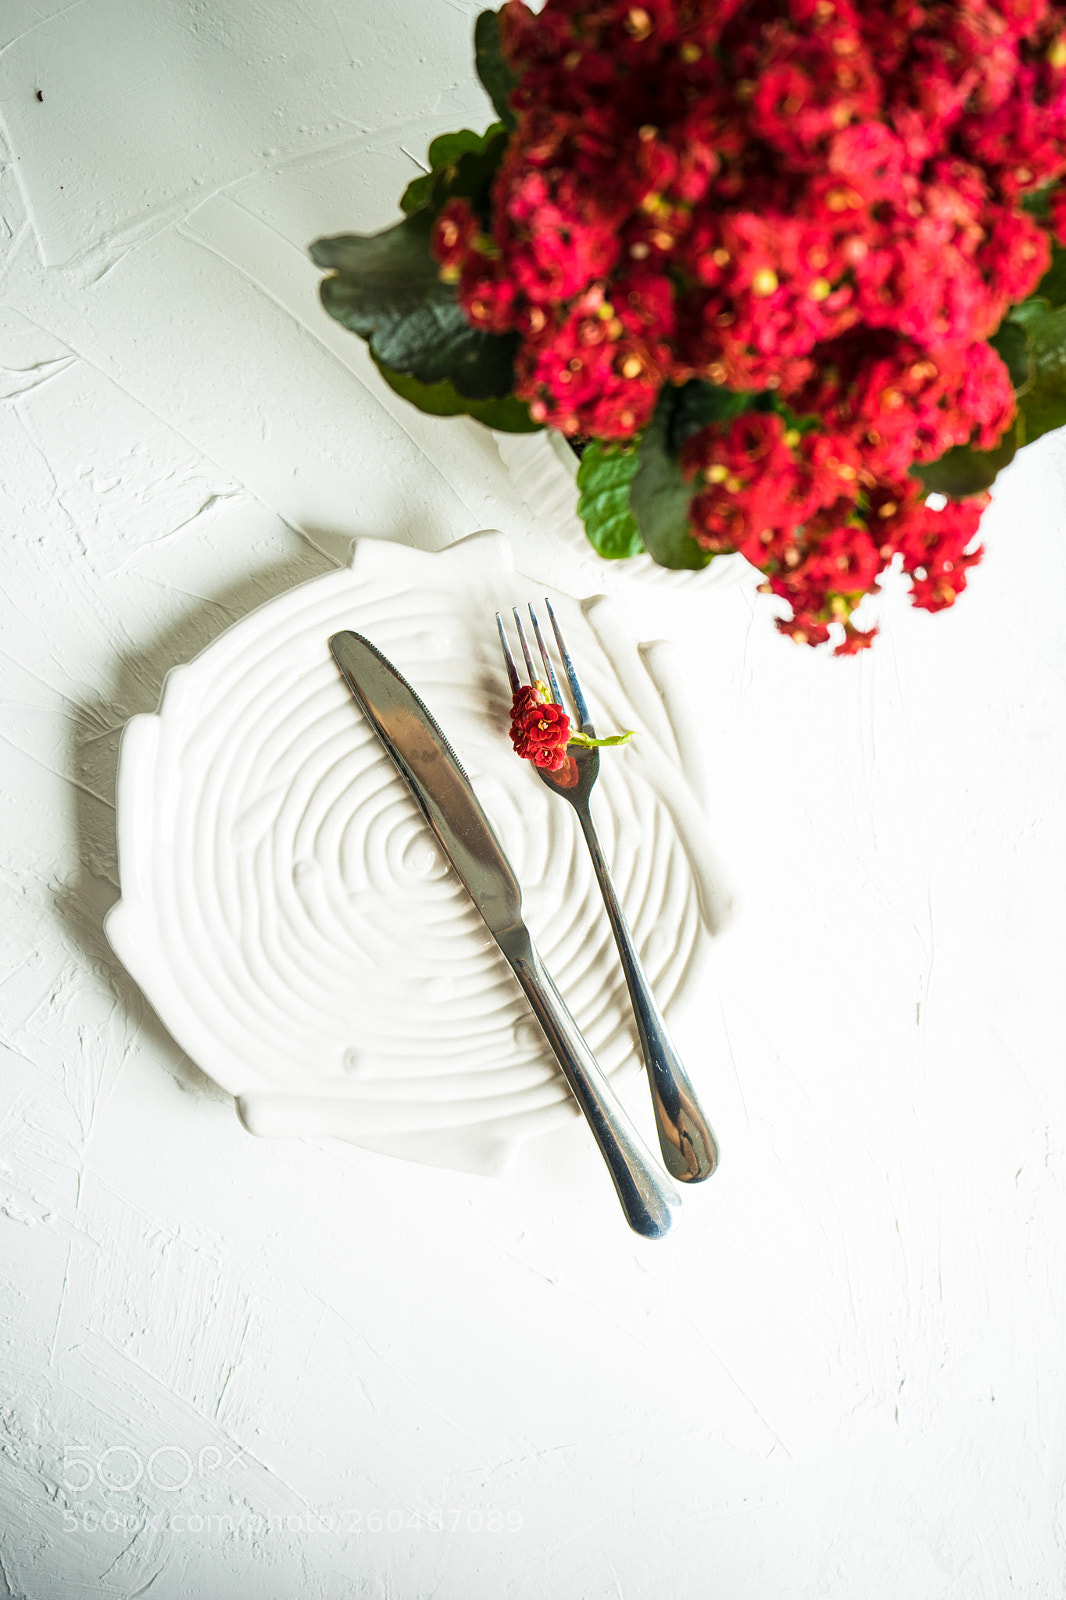 Sony a7 sample photo. Summer floral table setting photography